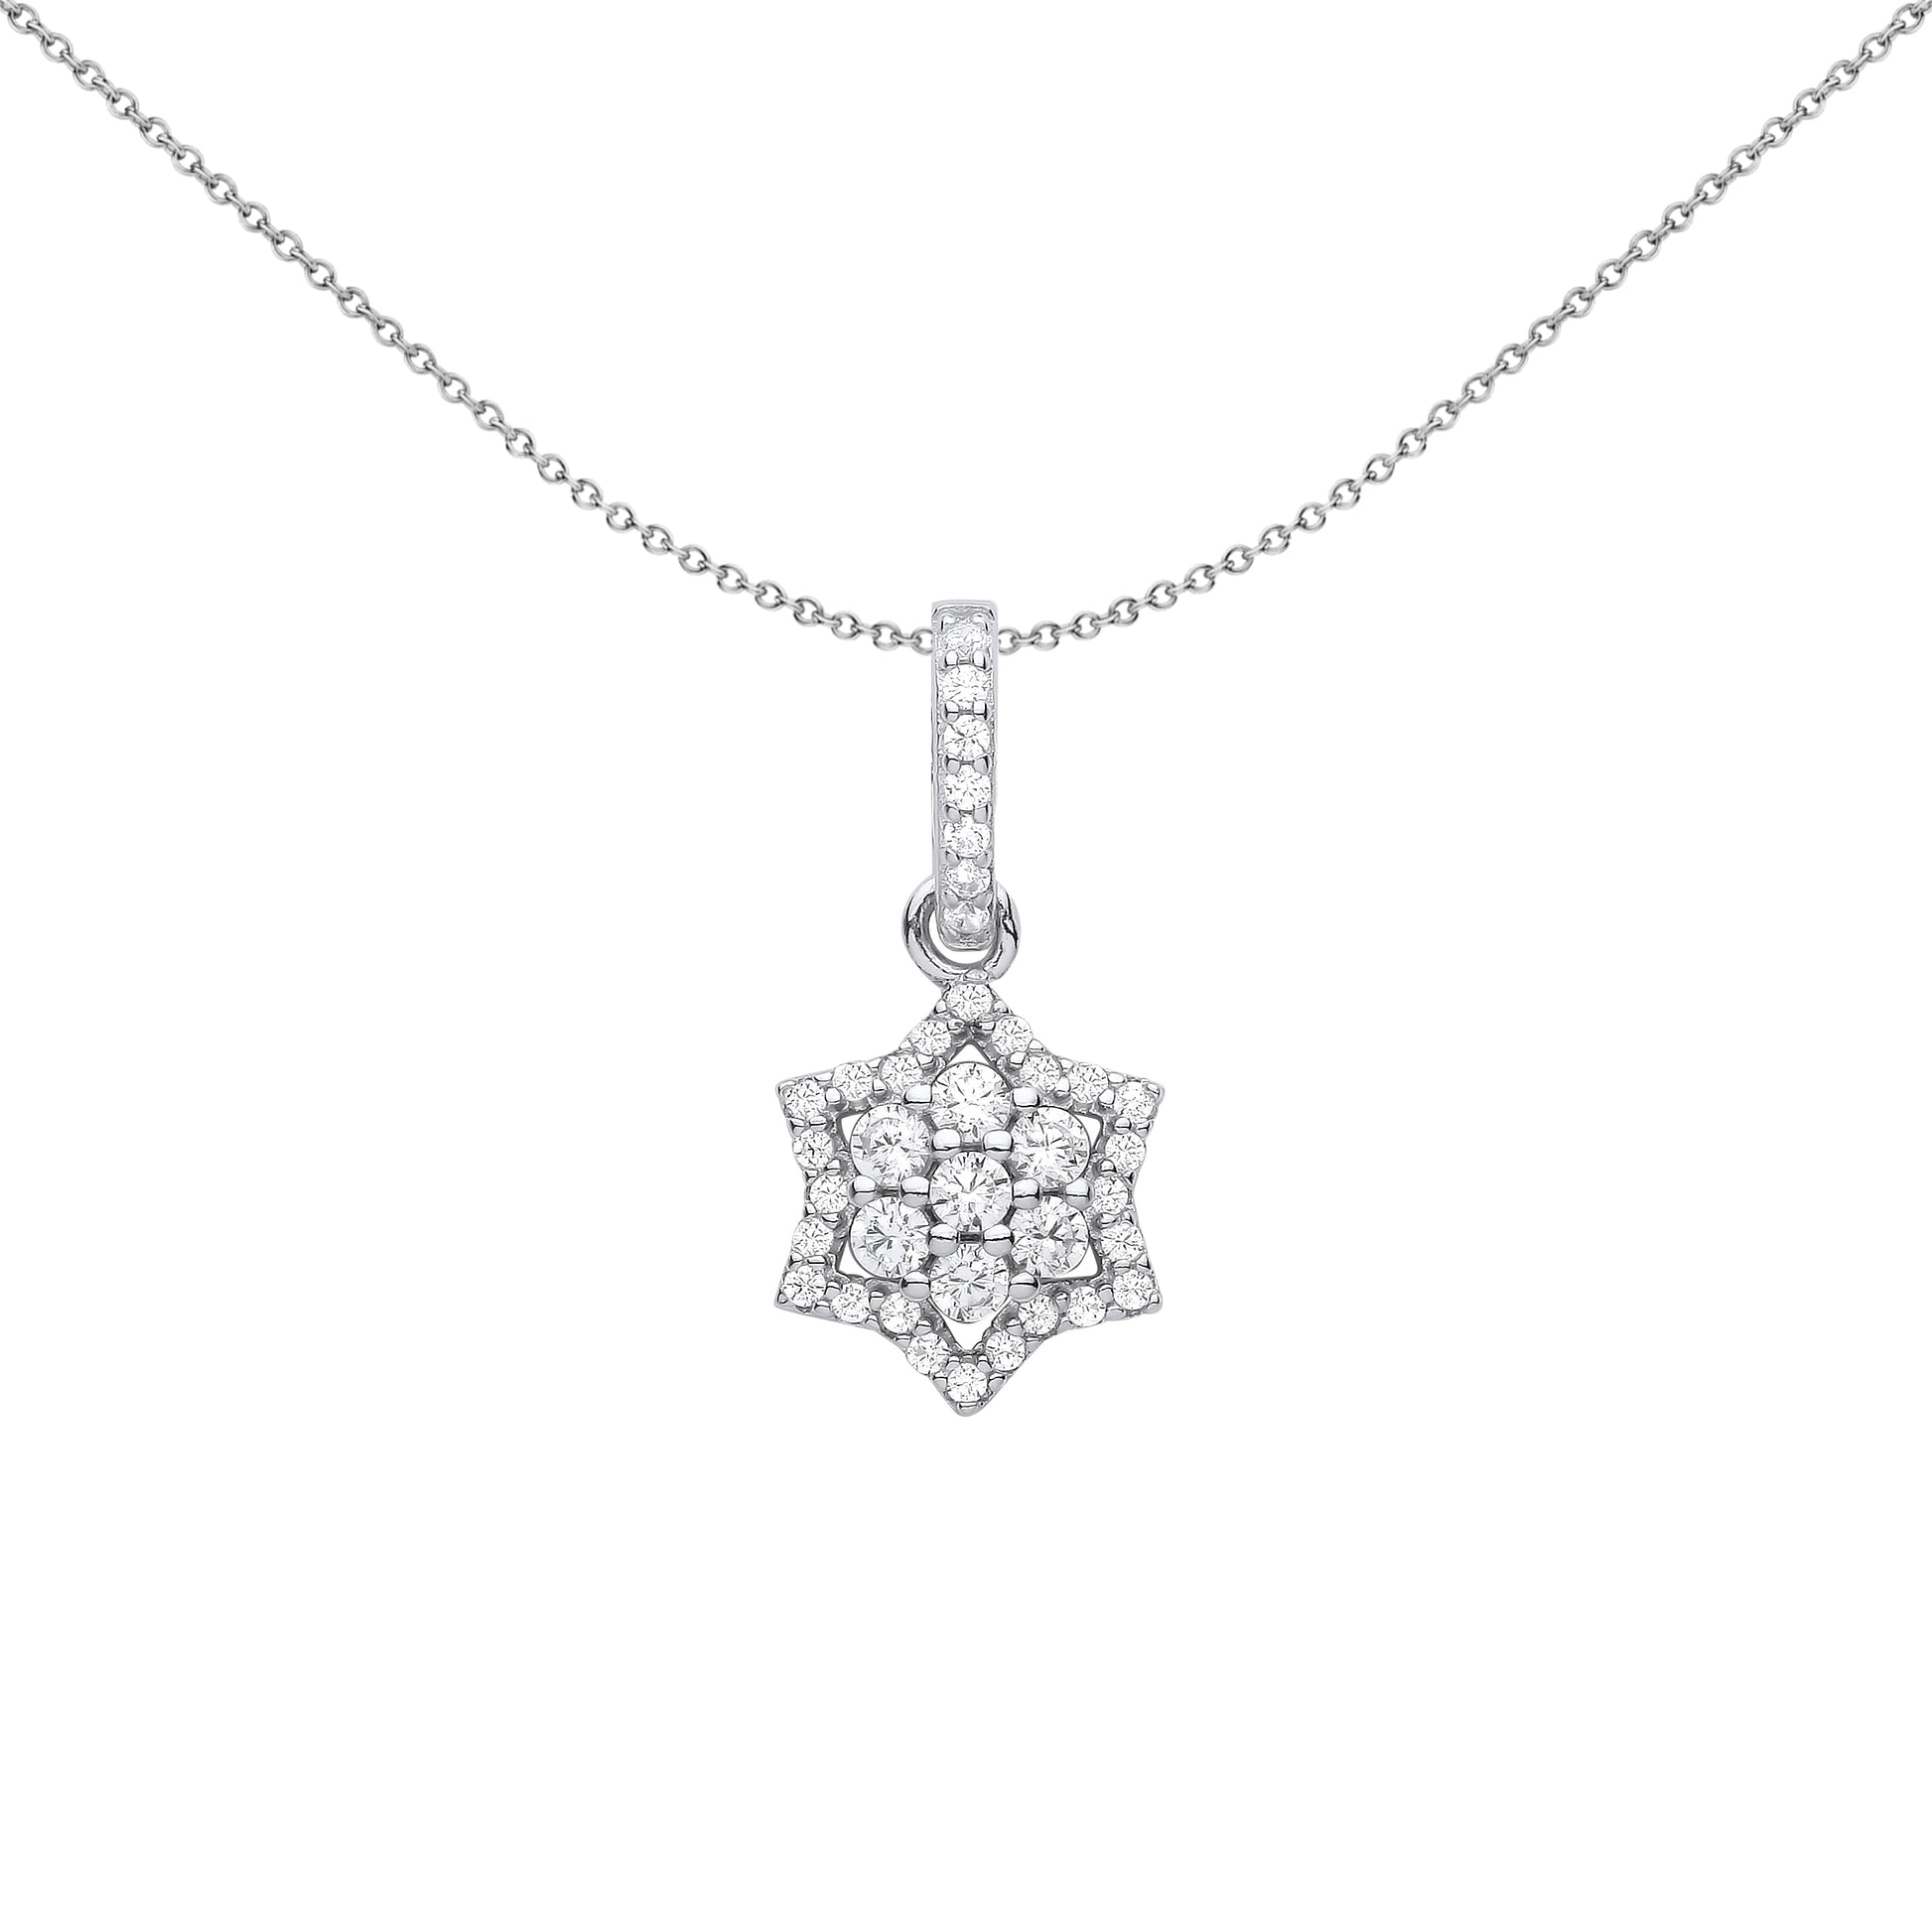 Silver  6 Pointed Star of Magen David Pendant Necklace - GVP608